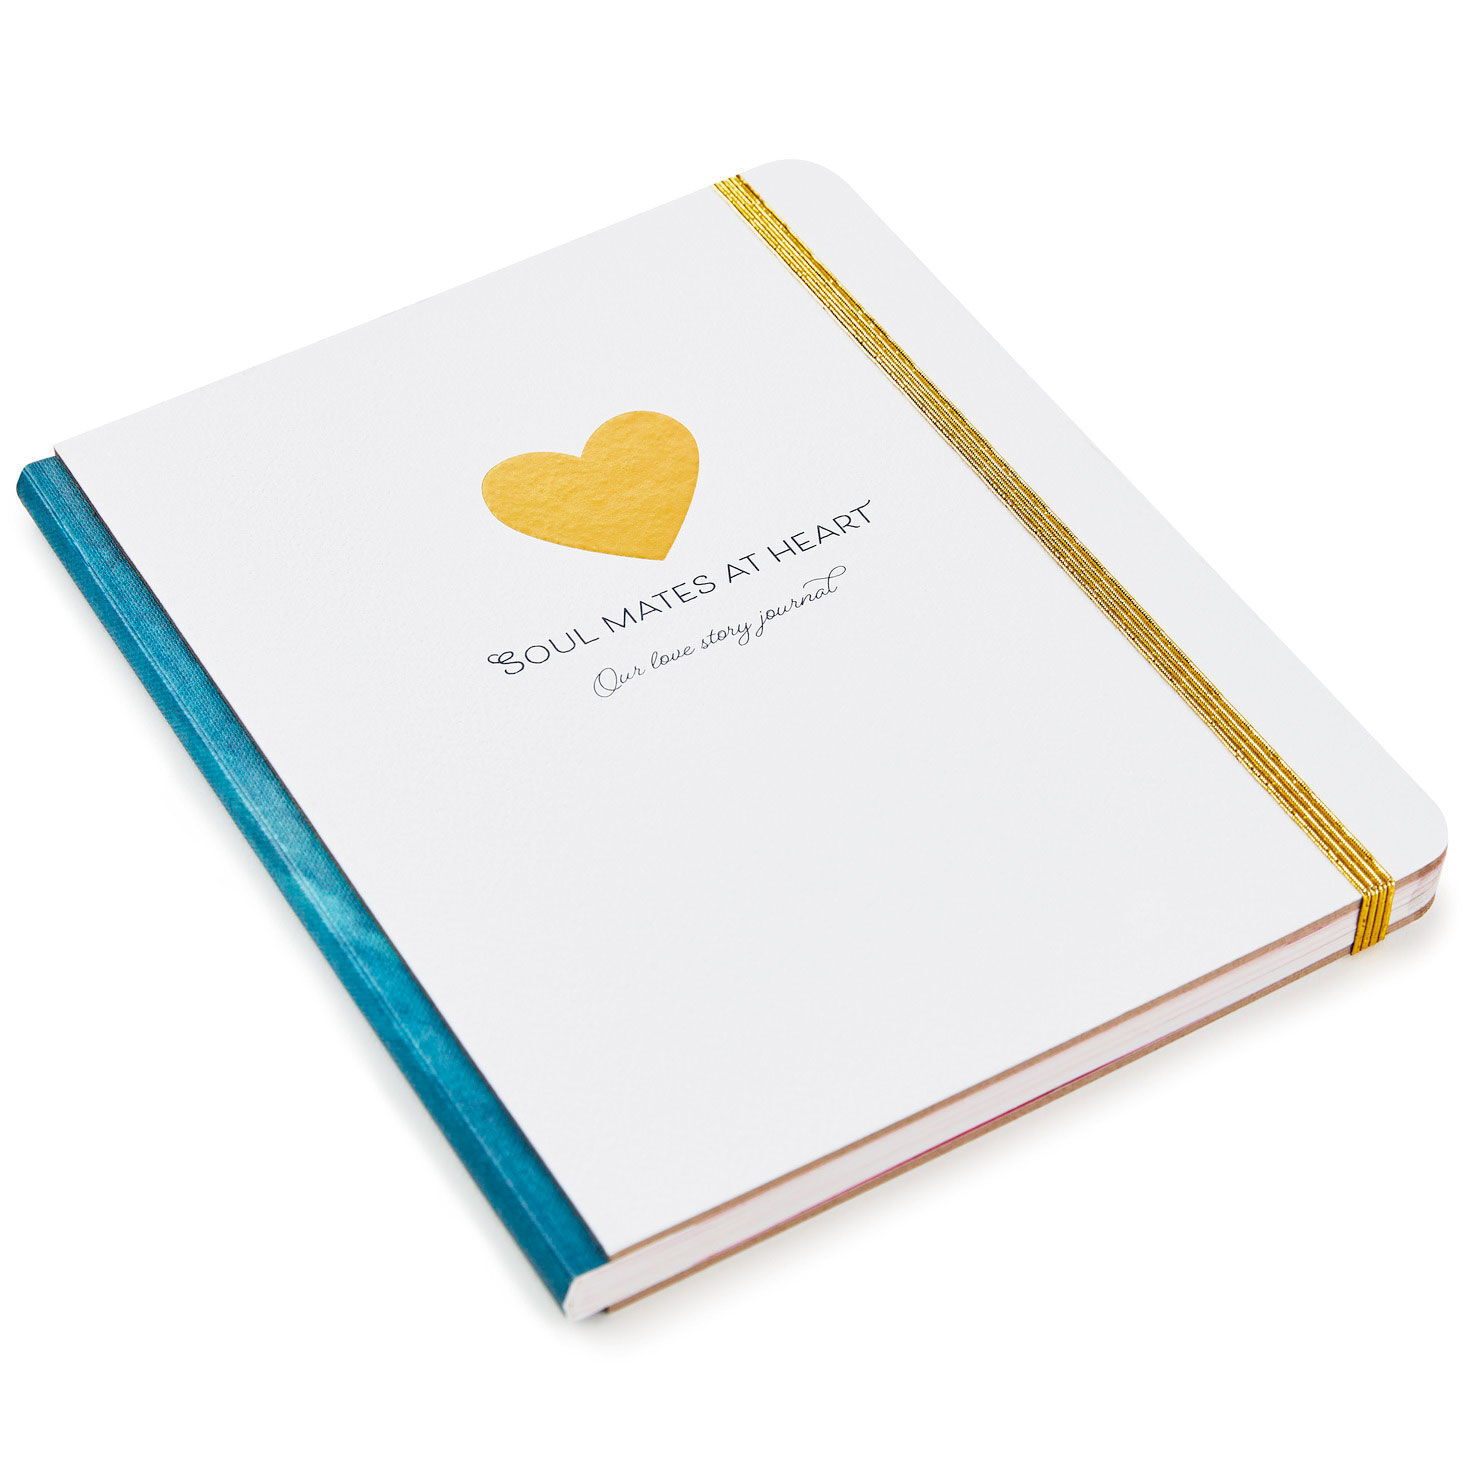 Soul Mates at Heart: Our Love Story Prompted Journal for only USD 19.99 | Hallmark